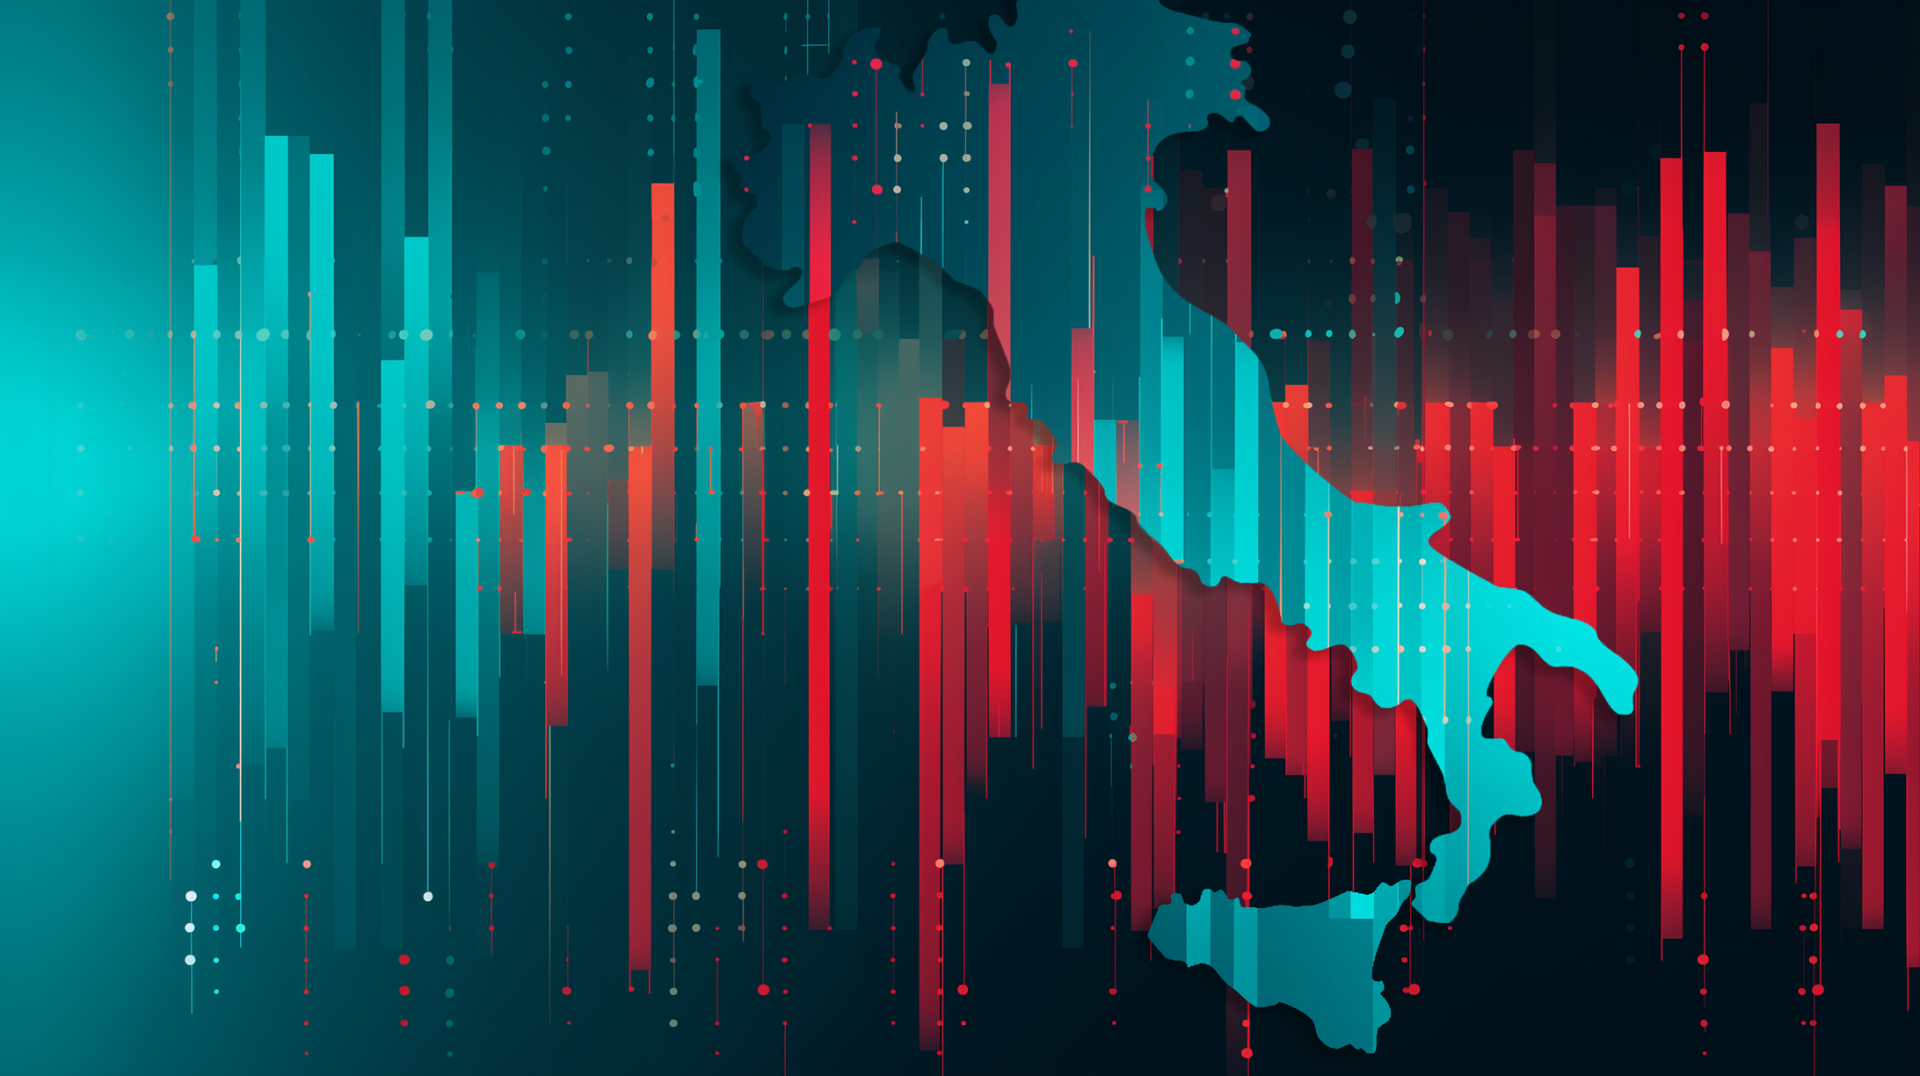 A stylised map of Italy in blue, against a background of red and blue vertical bars.